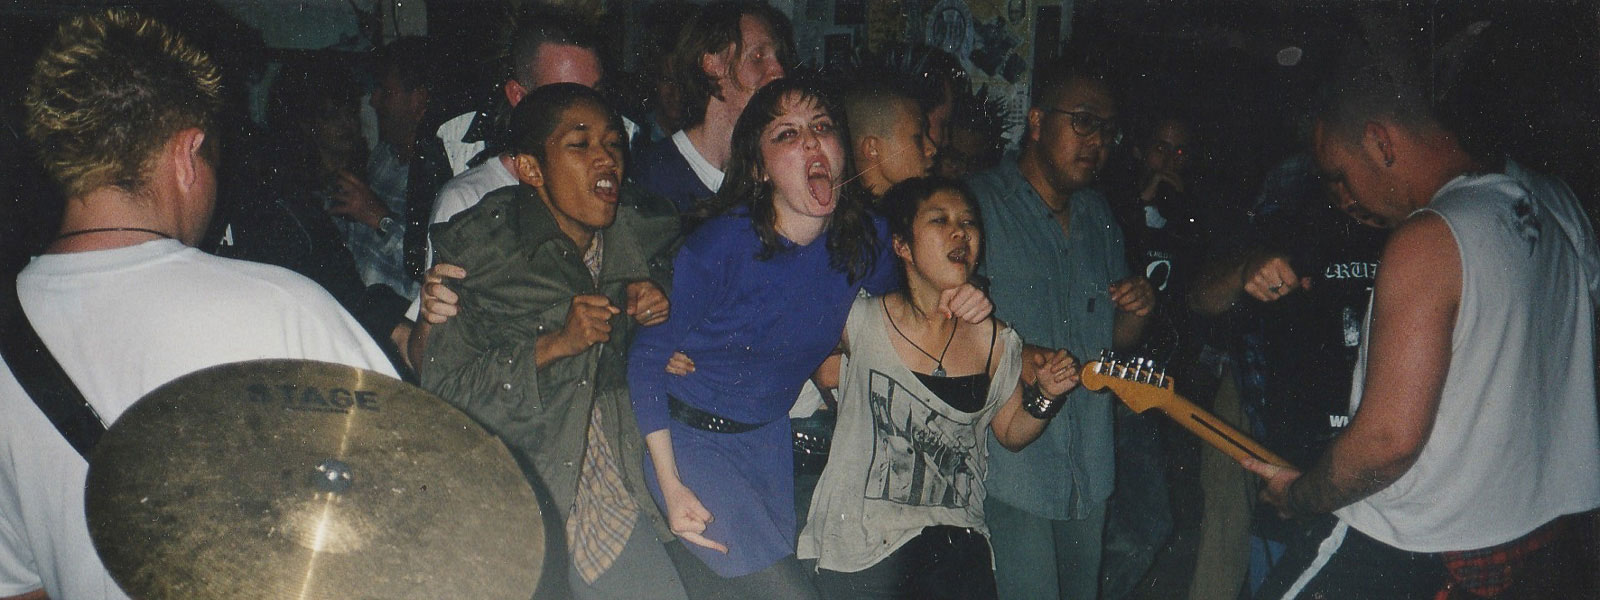 Image from 'Age of Rage - The Australian Punk Revolution'